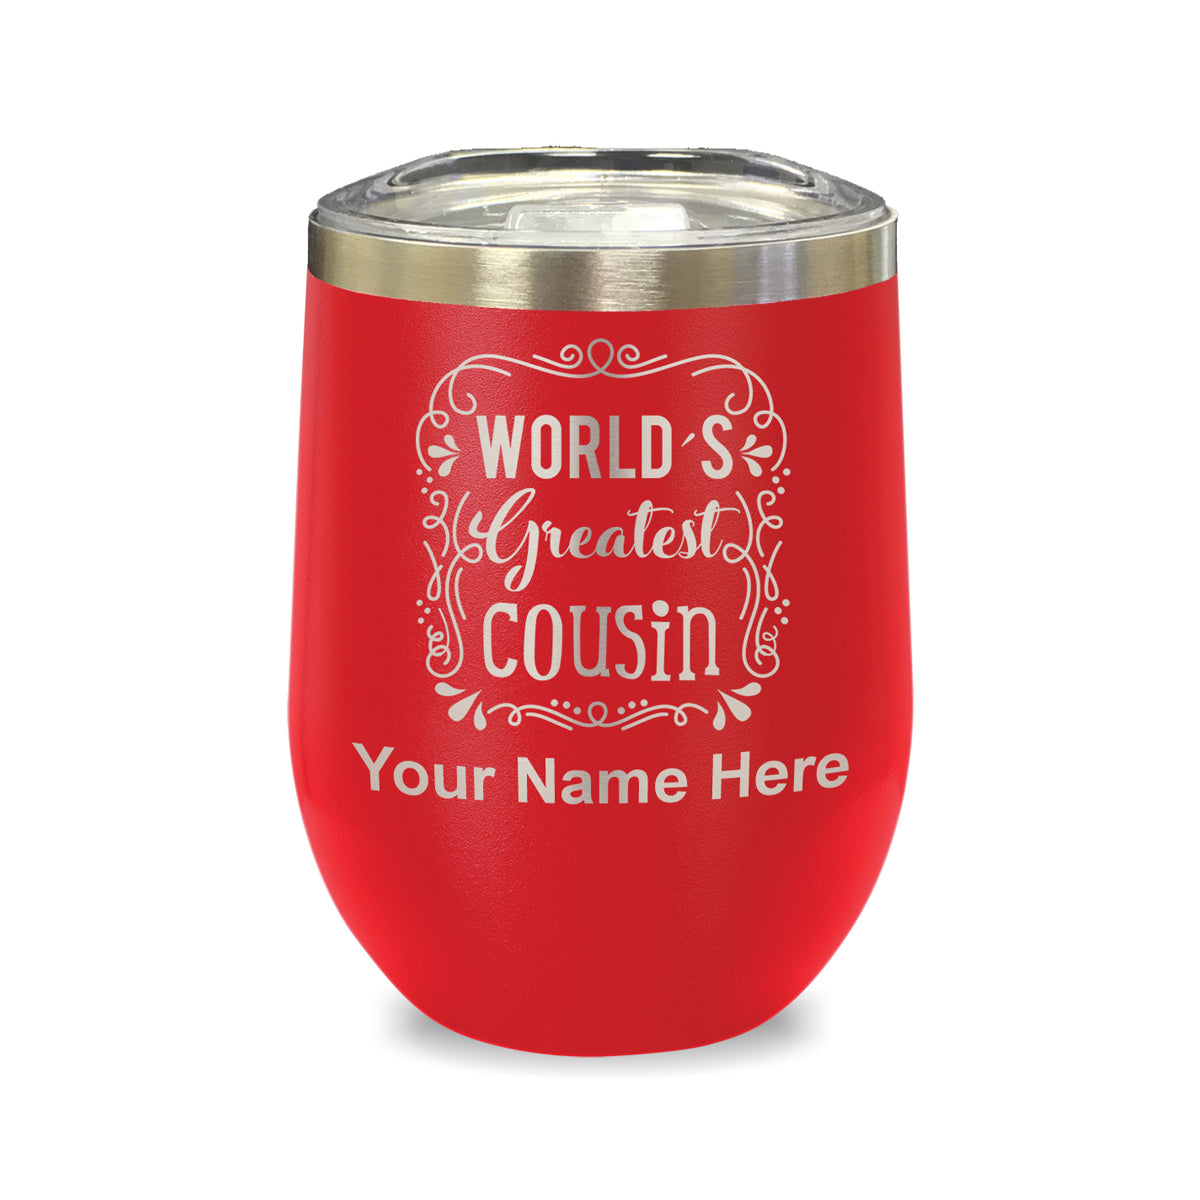 LaserGram Double Wall Stainless Steel Wine Glass, World's Greatest Cousin, Personalized Engraving Included